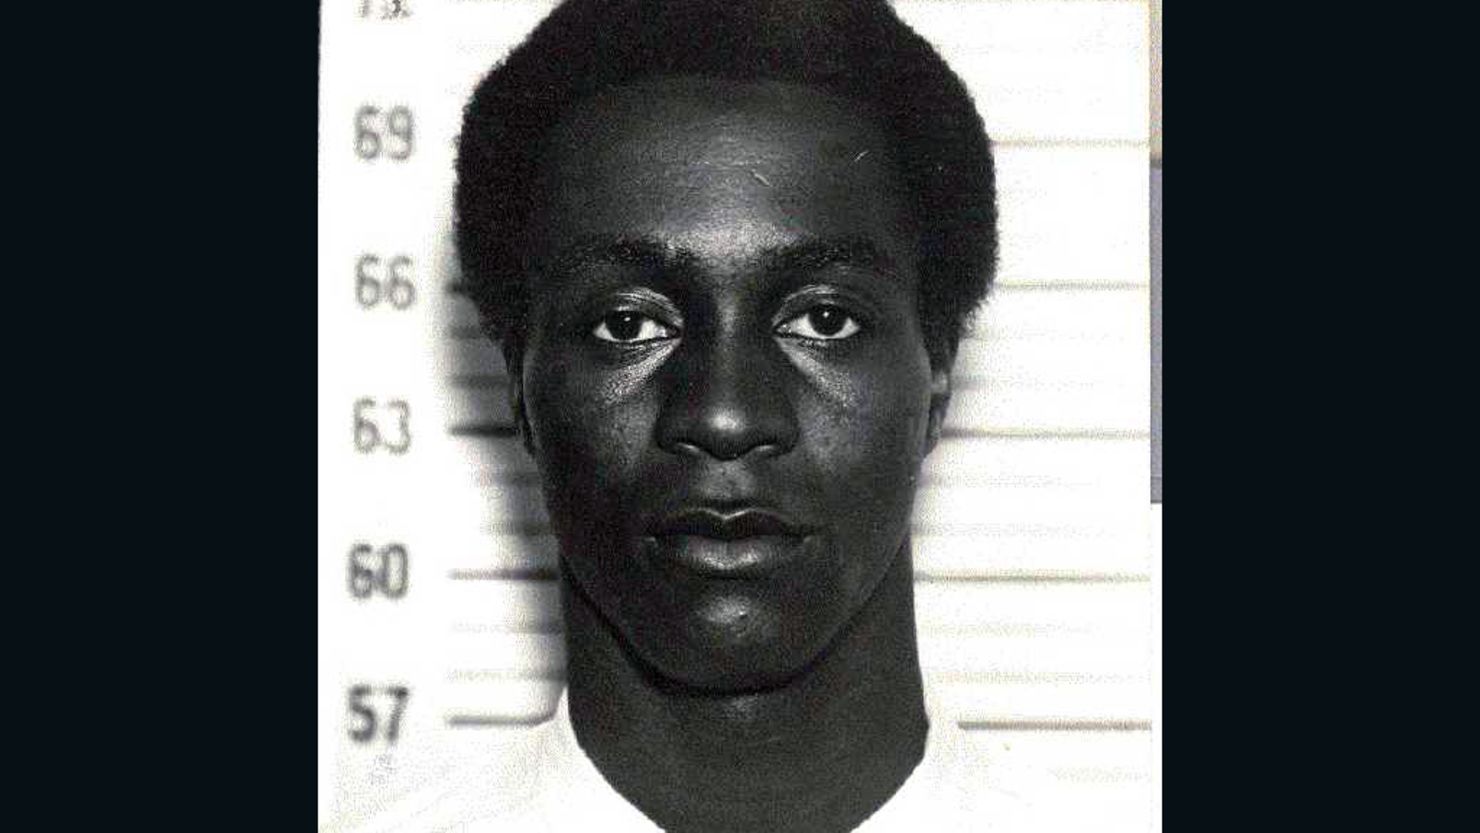 George Wright is charged with hijacking a plane in 1972.